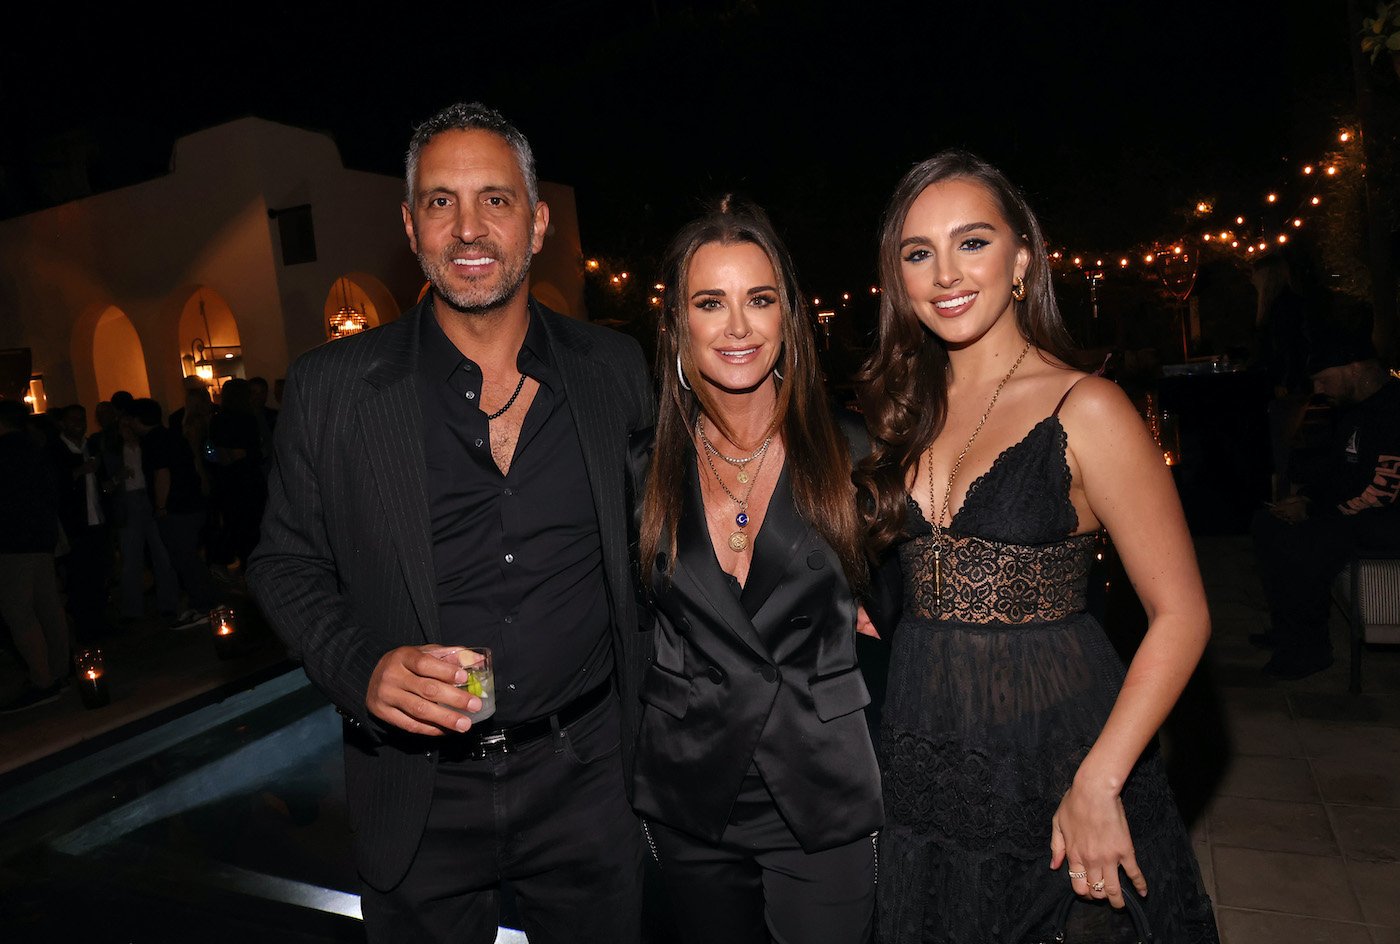 Mauricio Umansky, Kyle Richards, and Alexia Umansky attend the 'Buying Beverly Hills' premiere party